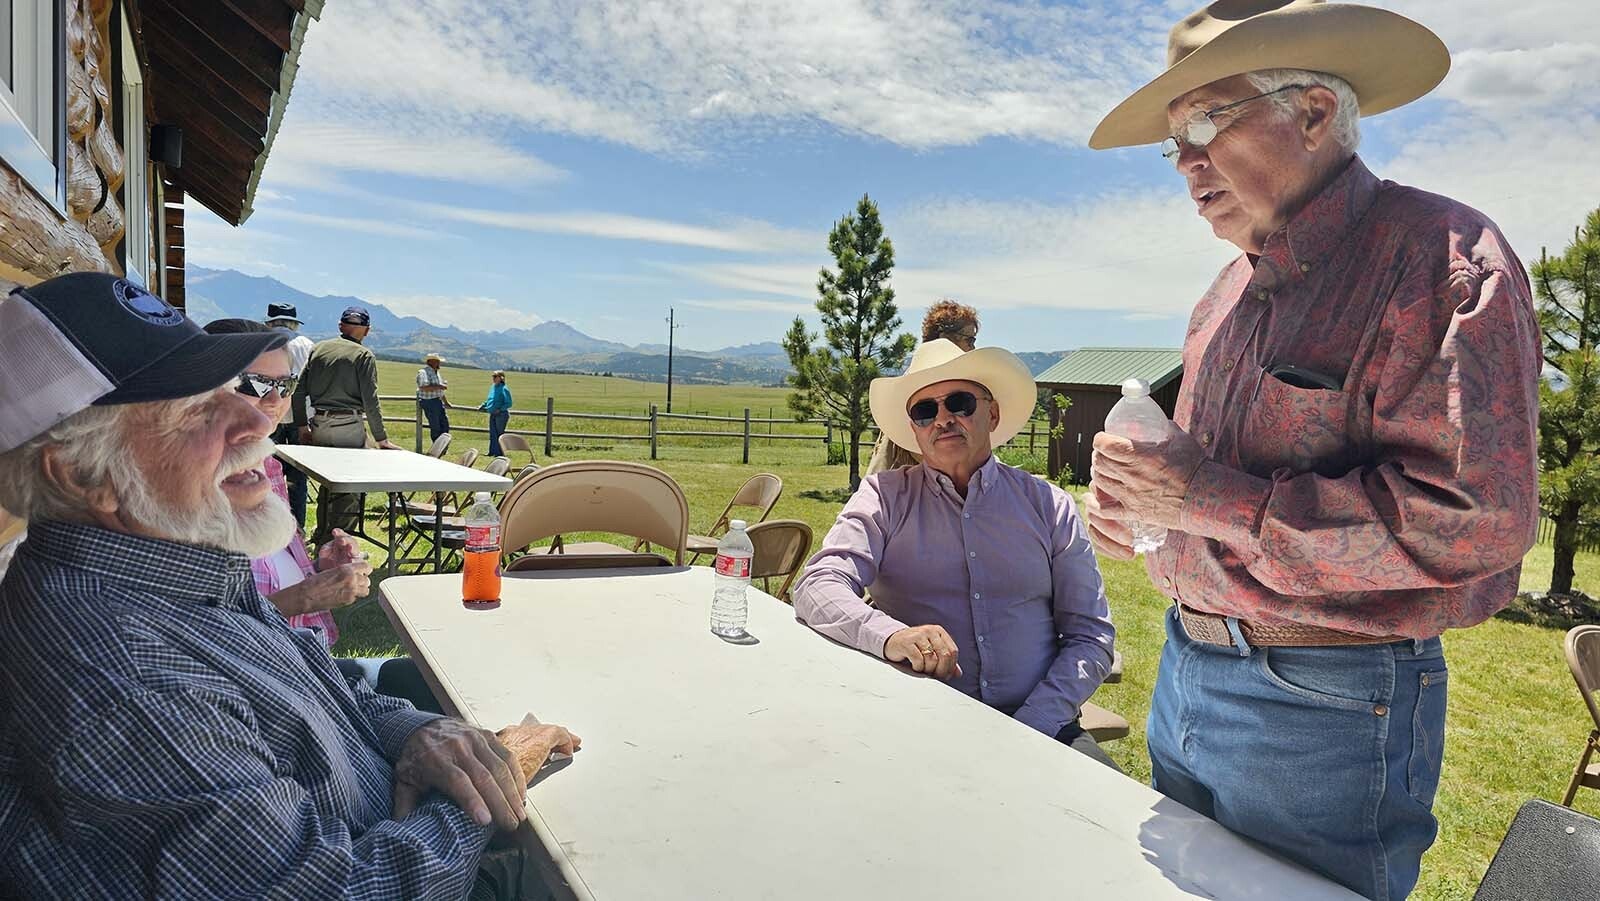 Steve "Shakey" Chadwick, front left, talks to friends during Buckboard Sunday after the potluck lunch.